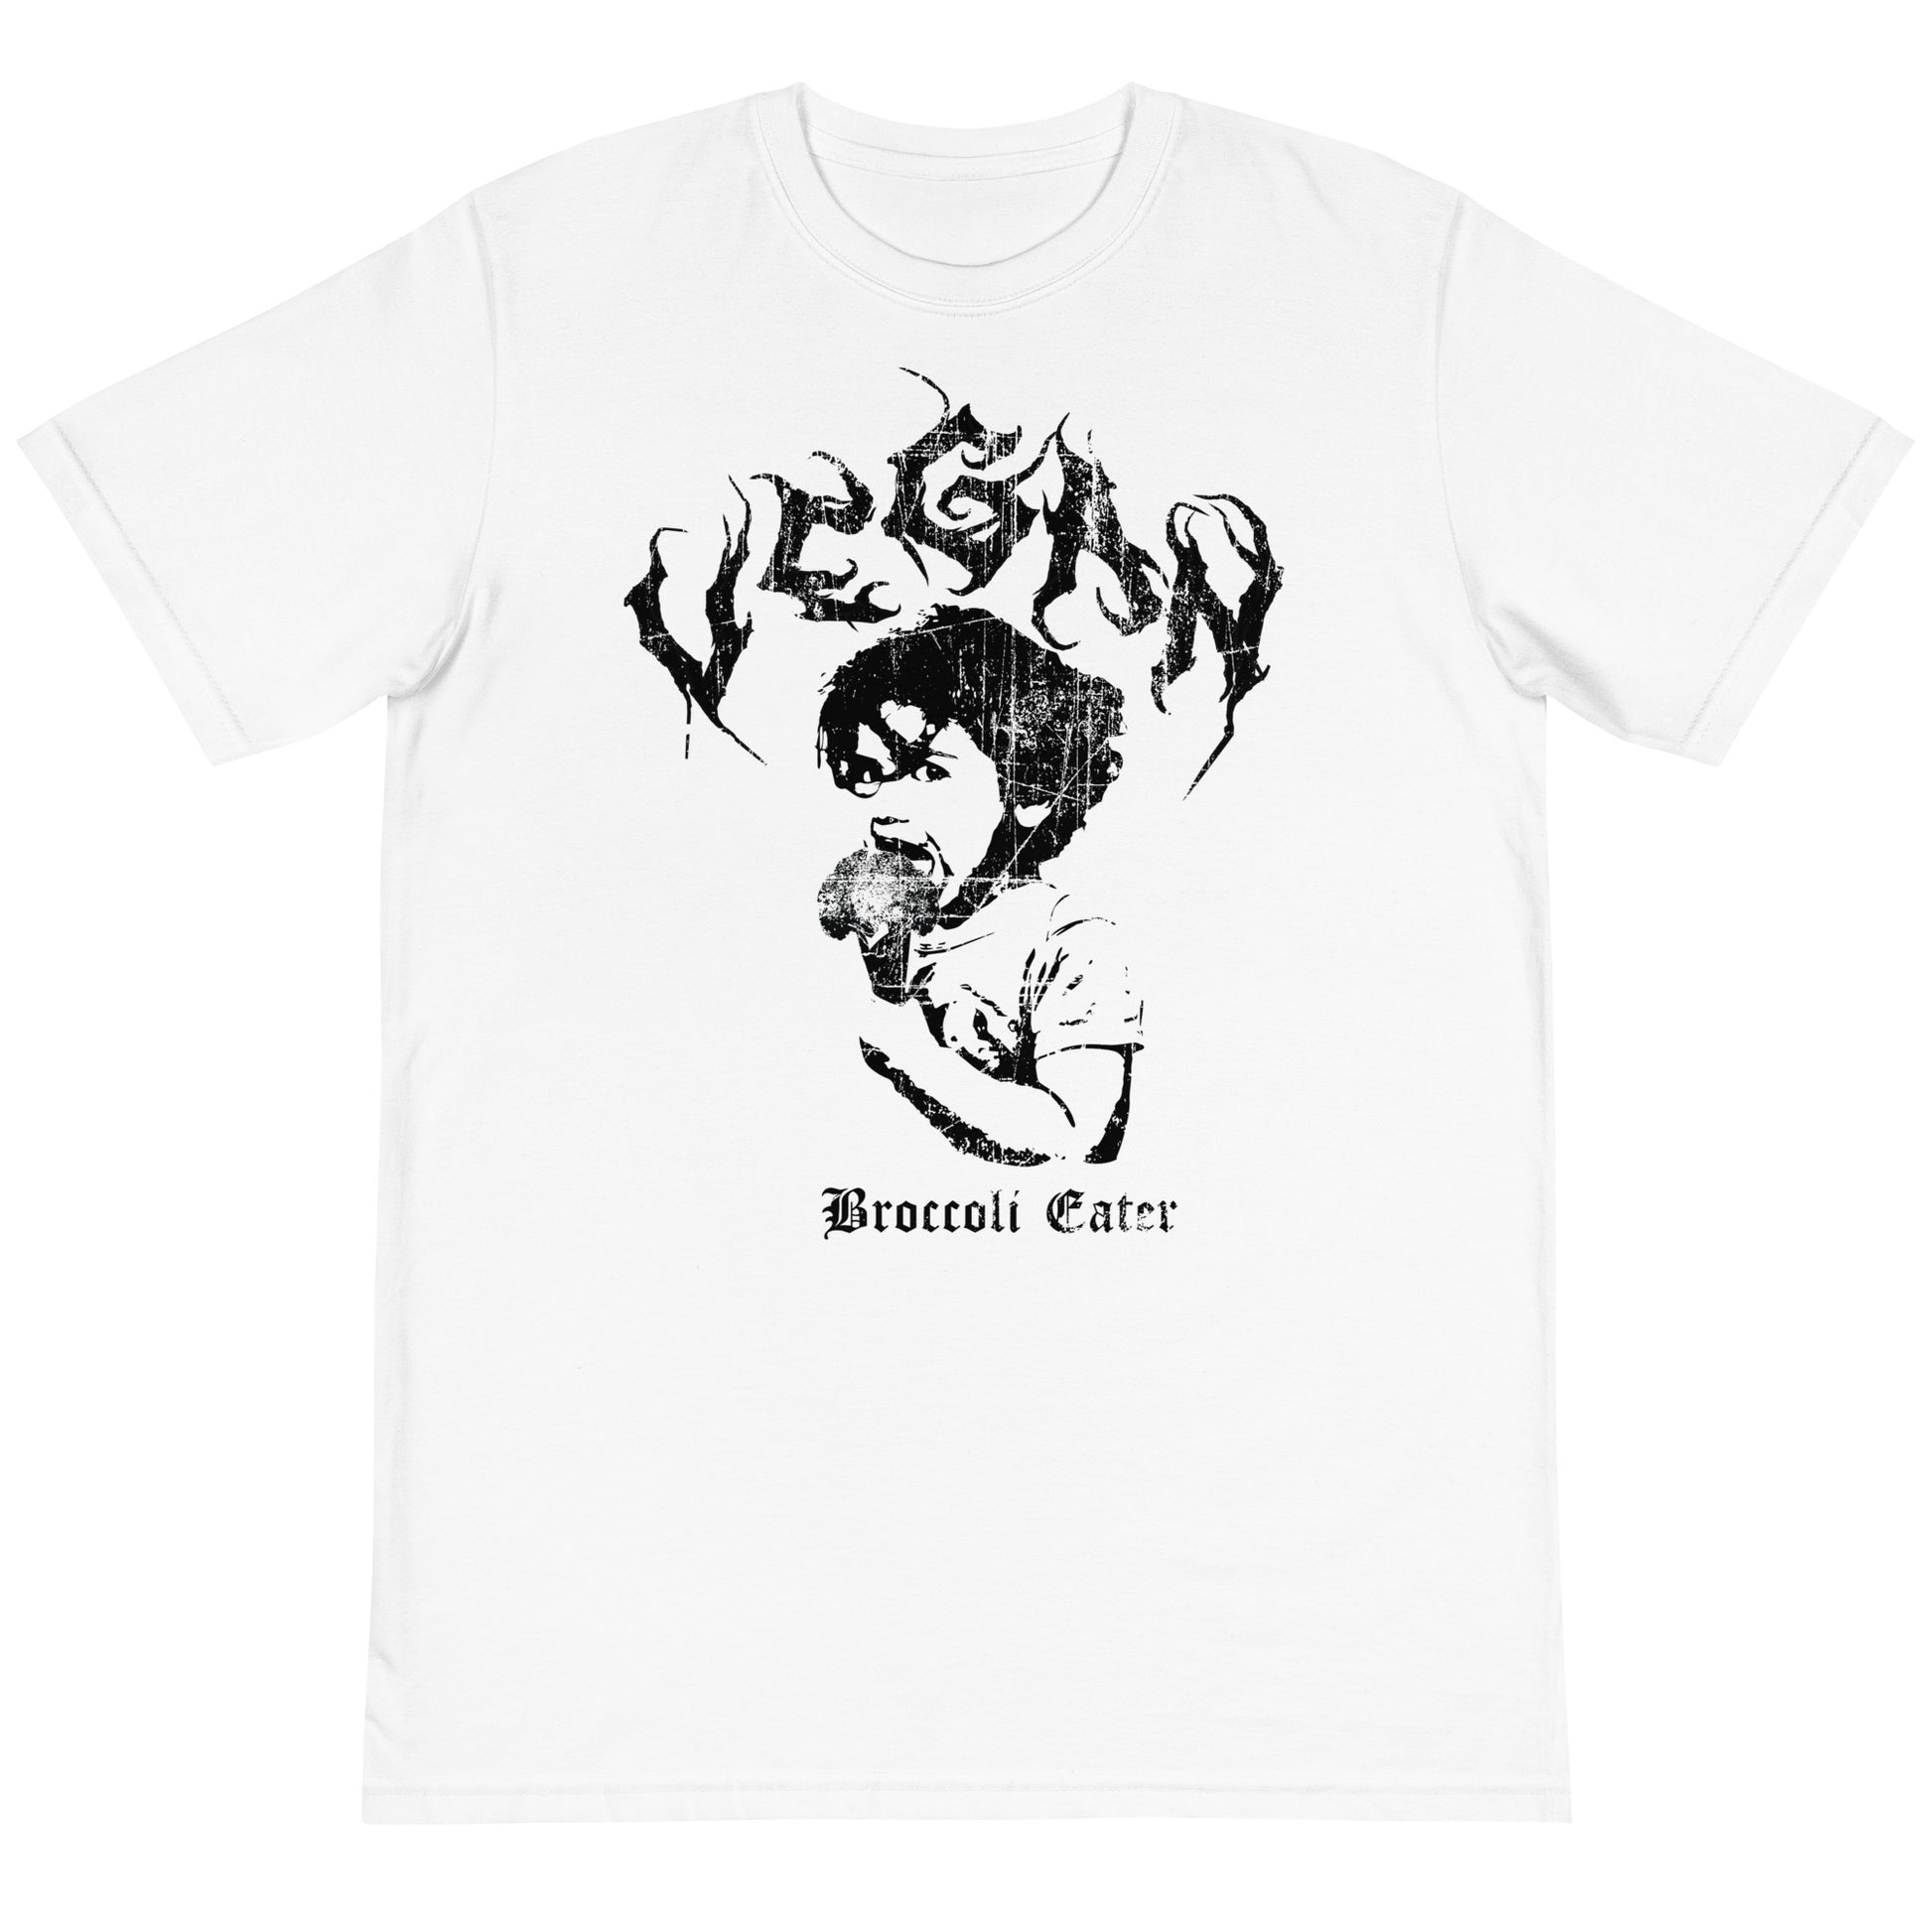 Vegan Inspired Rock fashion Pop culture apparel and t-shirts